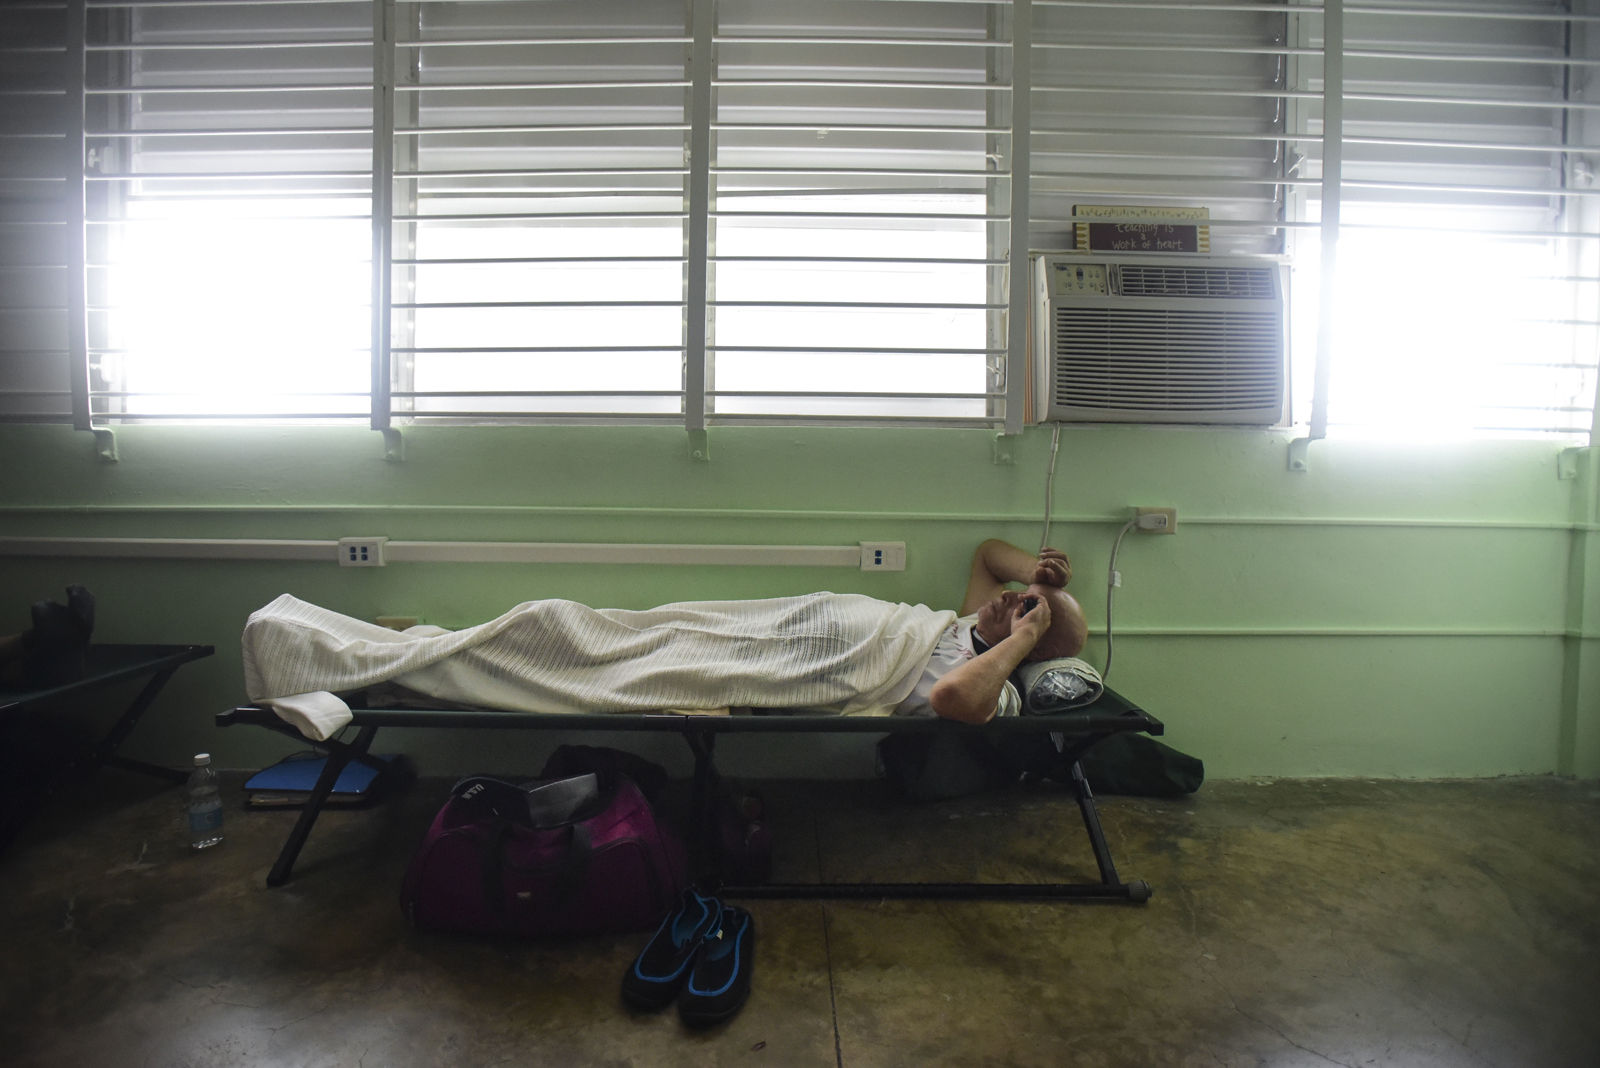 A man rests on a cot inside a shelter set up at the Berta Zalduondo elementary school during the passage of Hurricane Irma in Fajardo, northeast Puerto Rico, Wednesday, Sept. 6, 2017. Heavy rain and high winds lashed Puerto Ricoâ€™s northeast coast Wednesday as Hurricane Irma roared through Caribbean islands. (AP Photo/Carlos Giusti) NO PUBLICAR EN PUERTO RICO